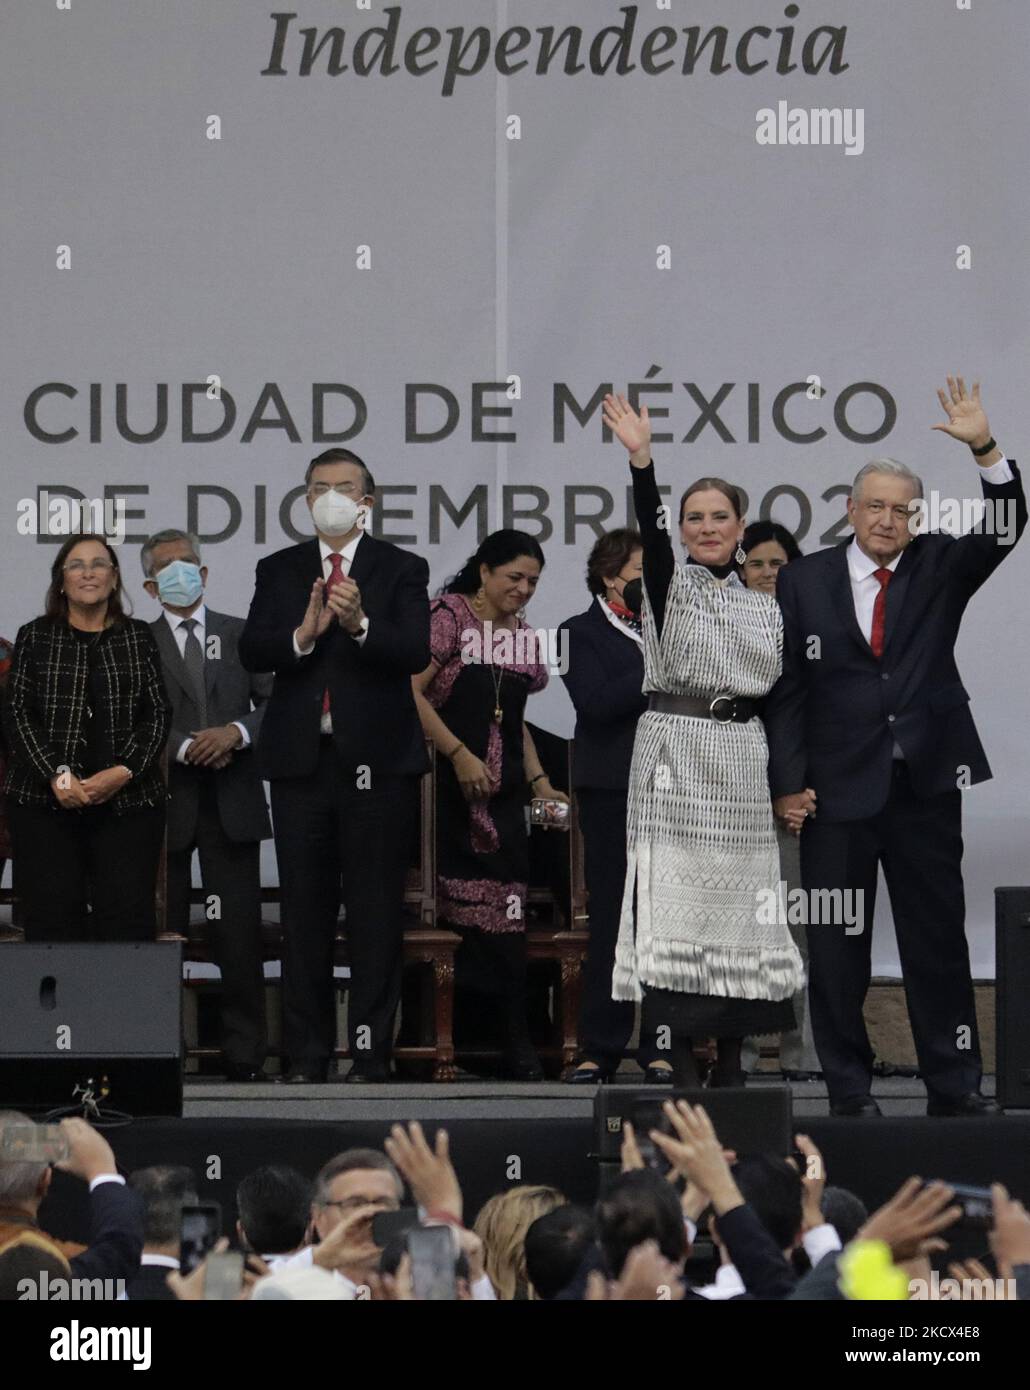 Andrés Manuel López Obrador, President of Mexico, accompanied by his wife Beatriz Gutiérrez Müller, before his message to more than 200,000 people in the Zócalo in Mexico City on the occasion of his third year in office. (Photo by Gerardo Vieyra/NurPhoto) Stock Photo